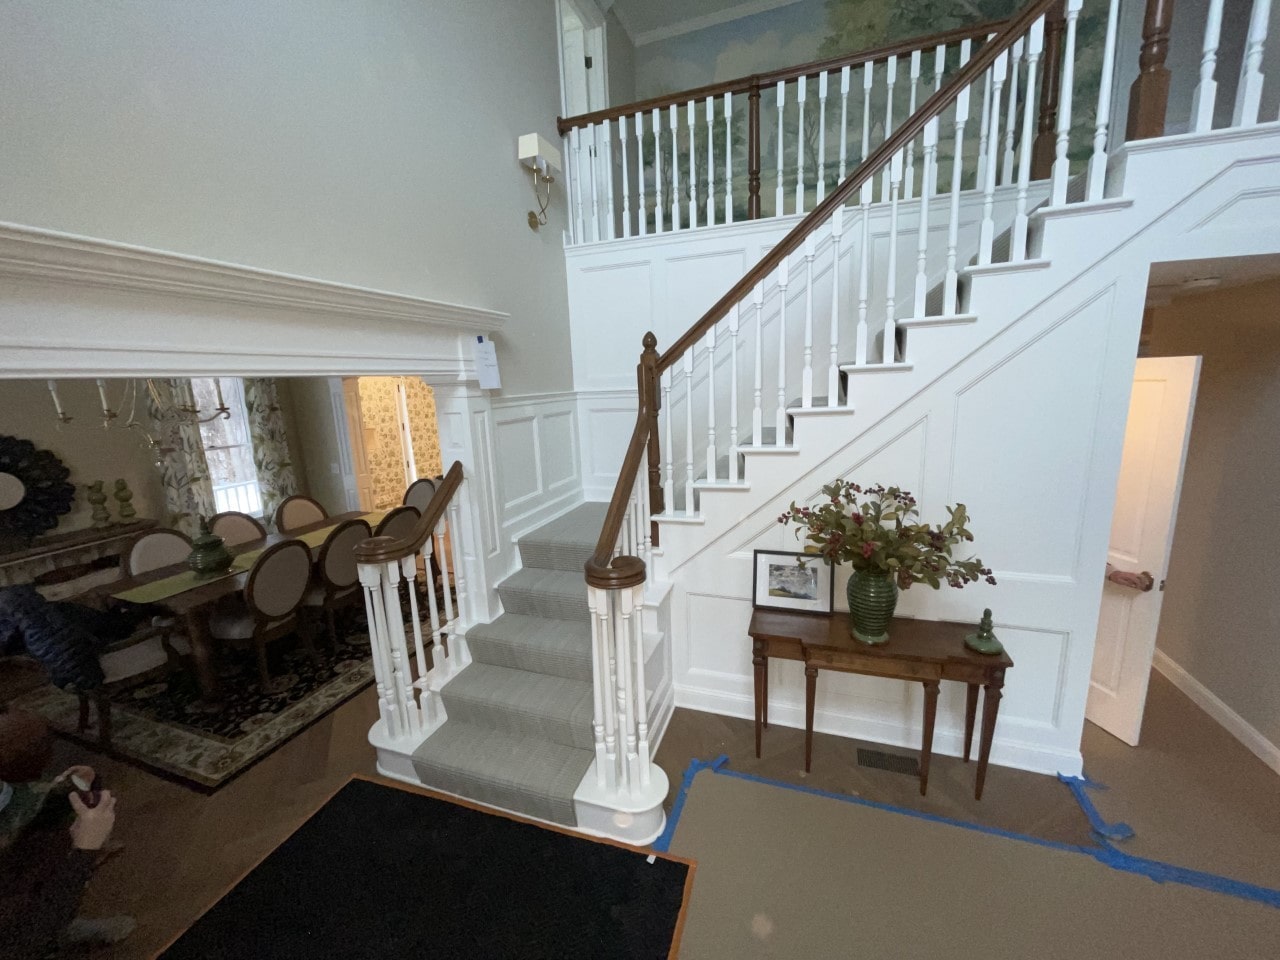 House Interior Stairs